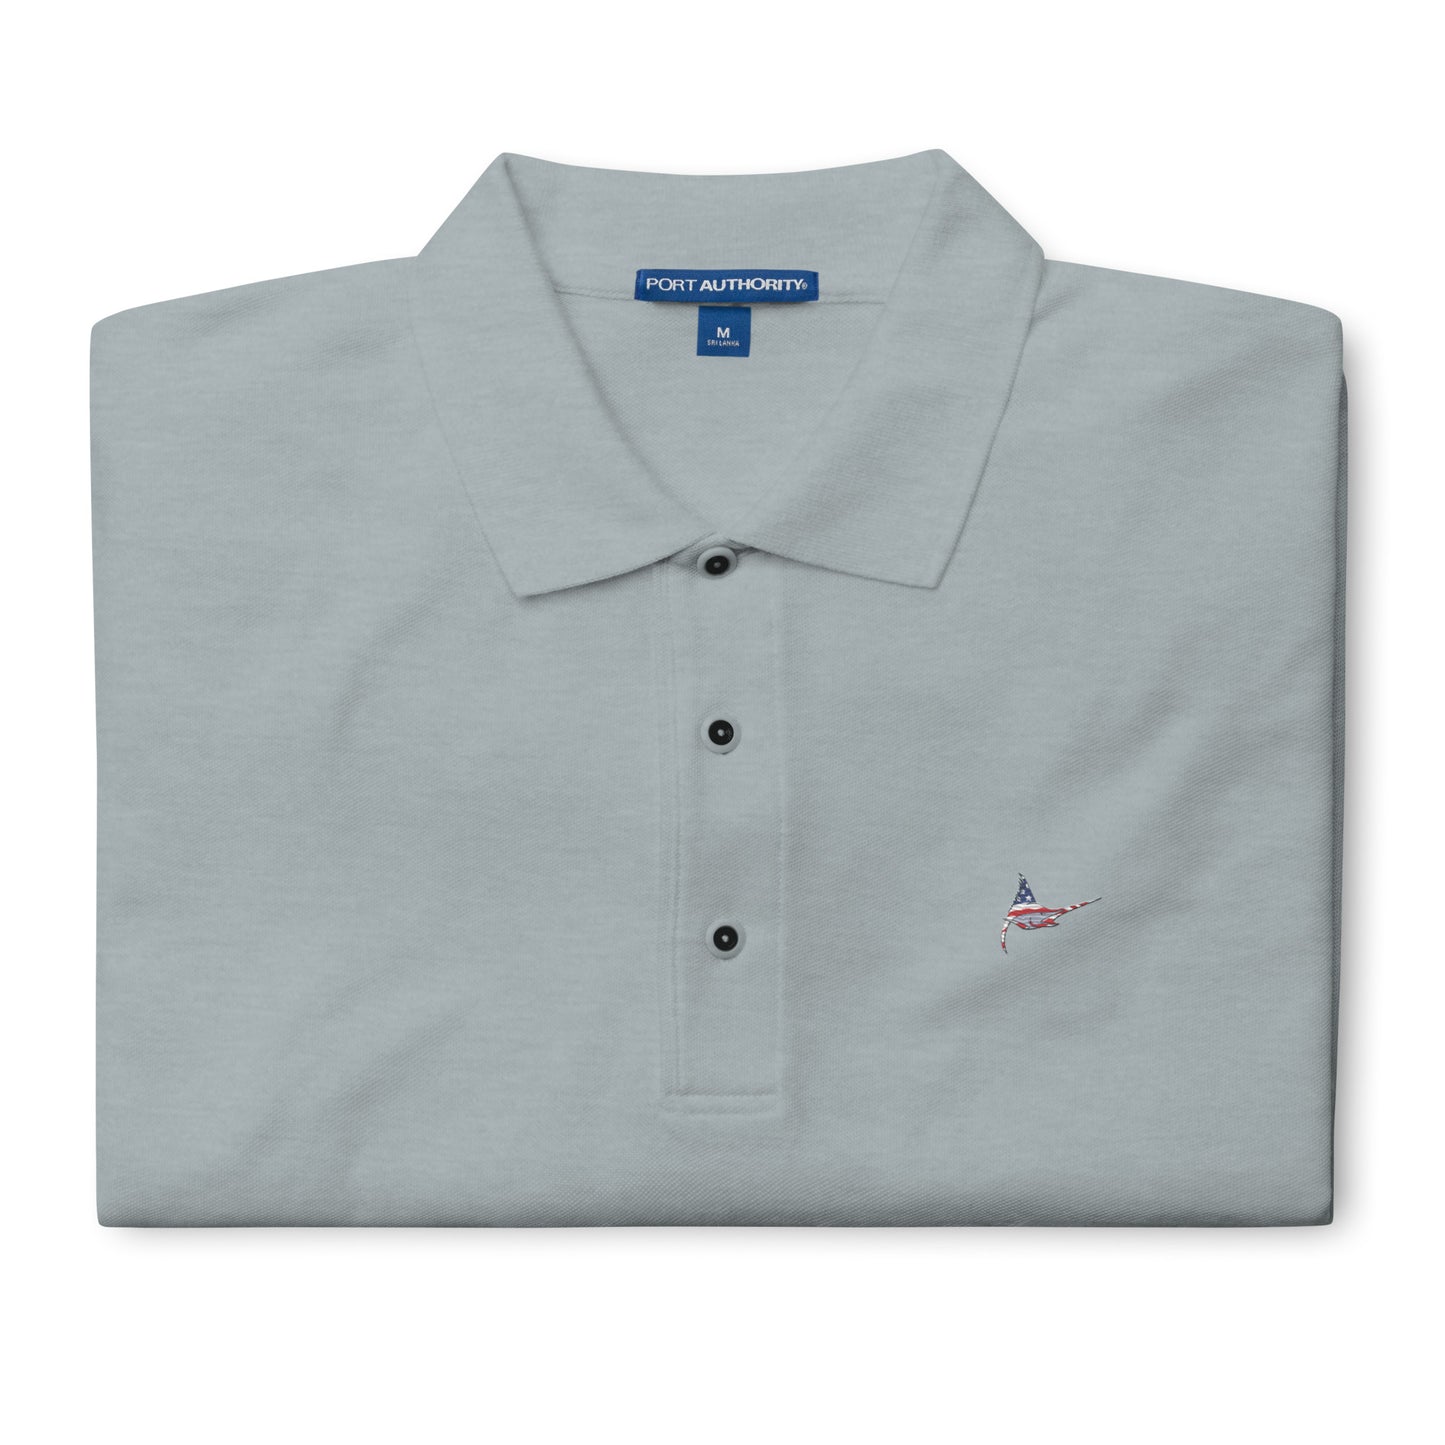 Shop Our Premium American Marlin Fishermen's Polo Today!